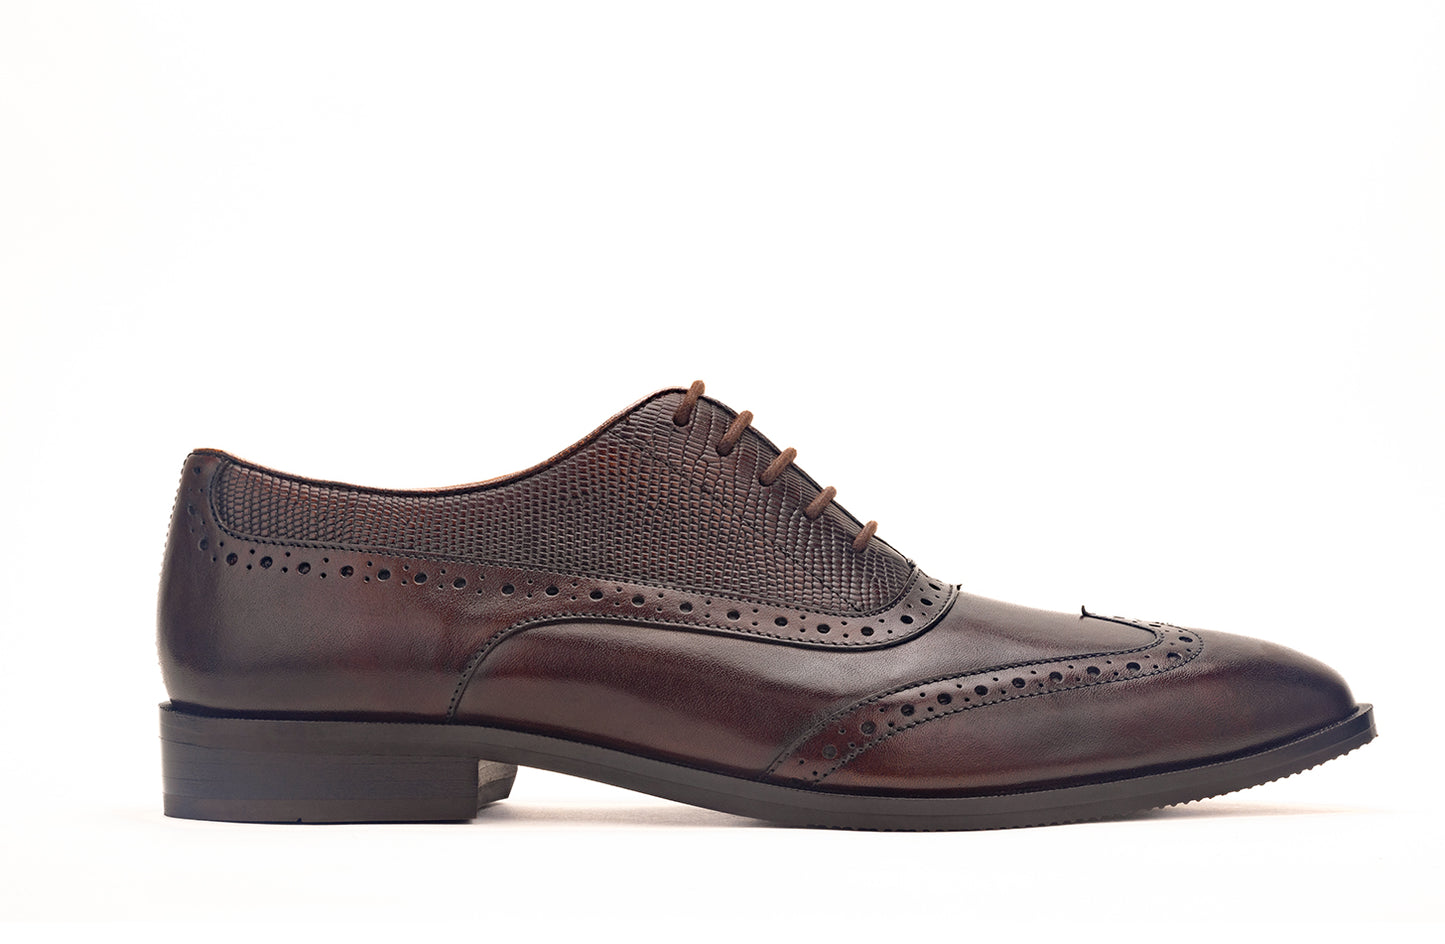 Wingcap brogue oxford with Lizard embossed quarter